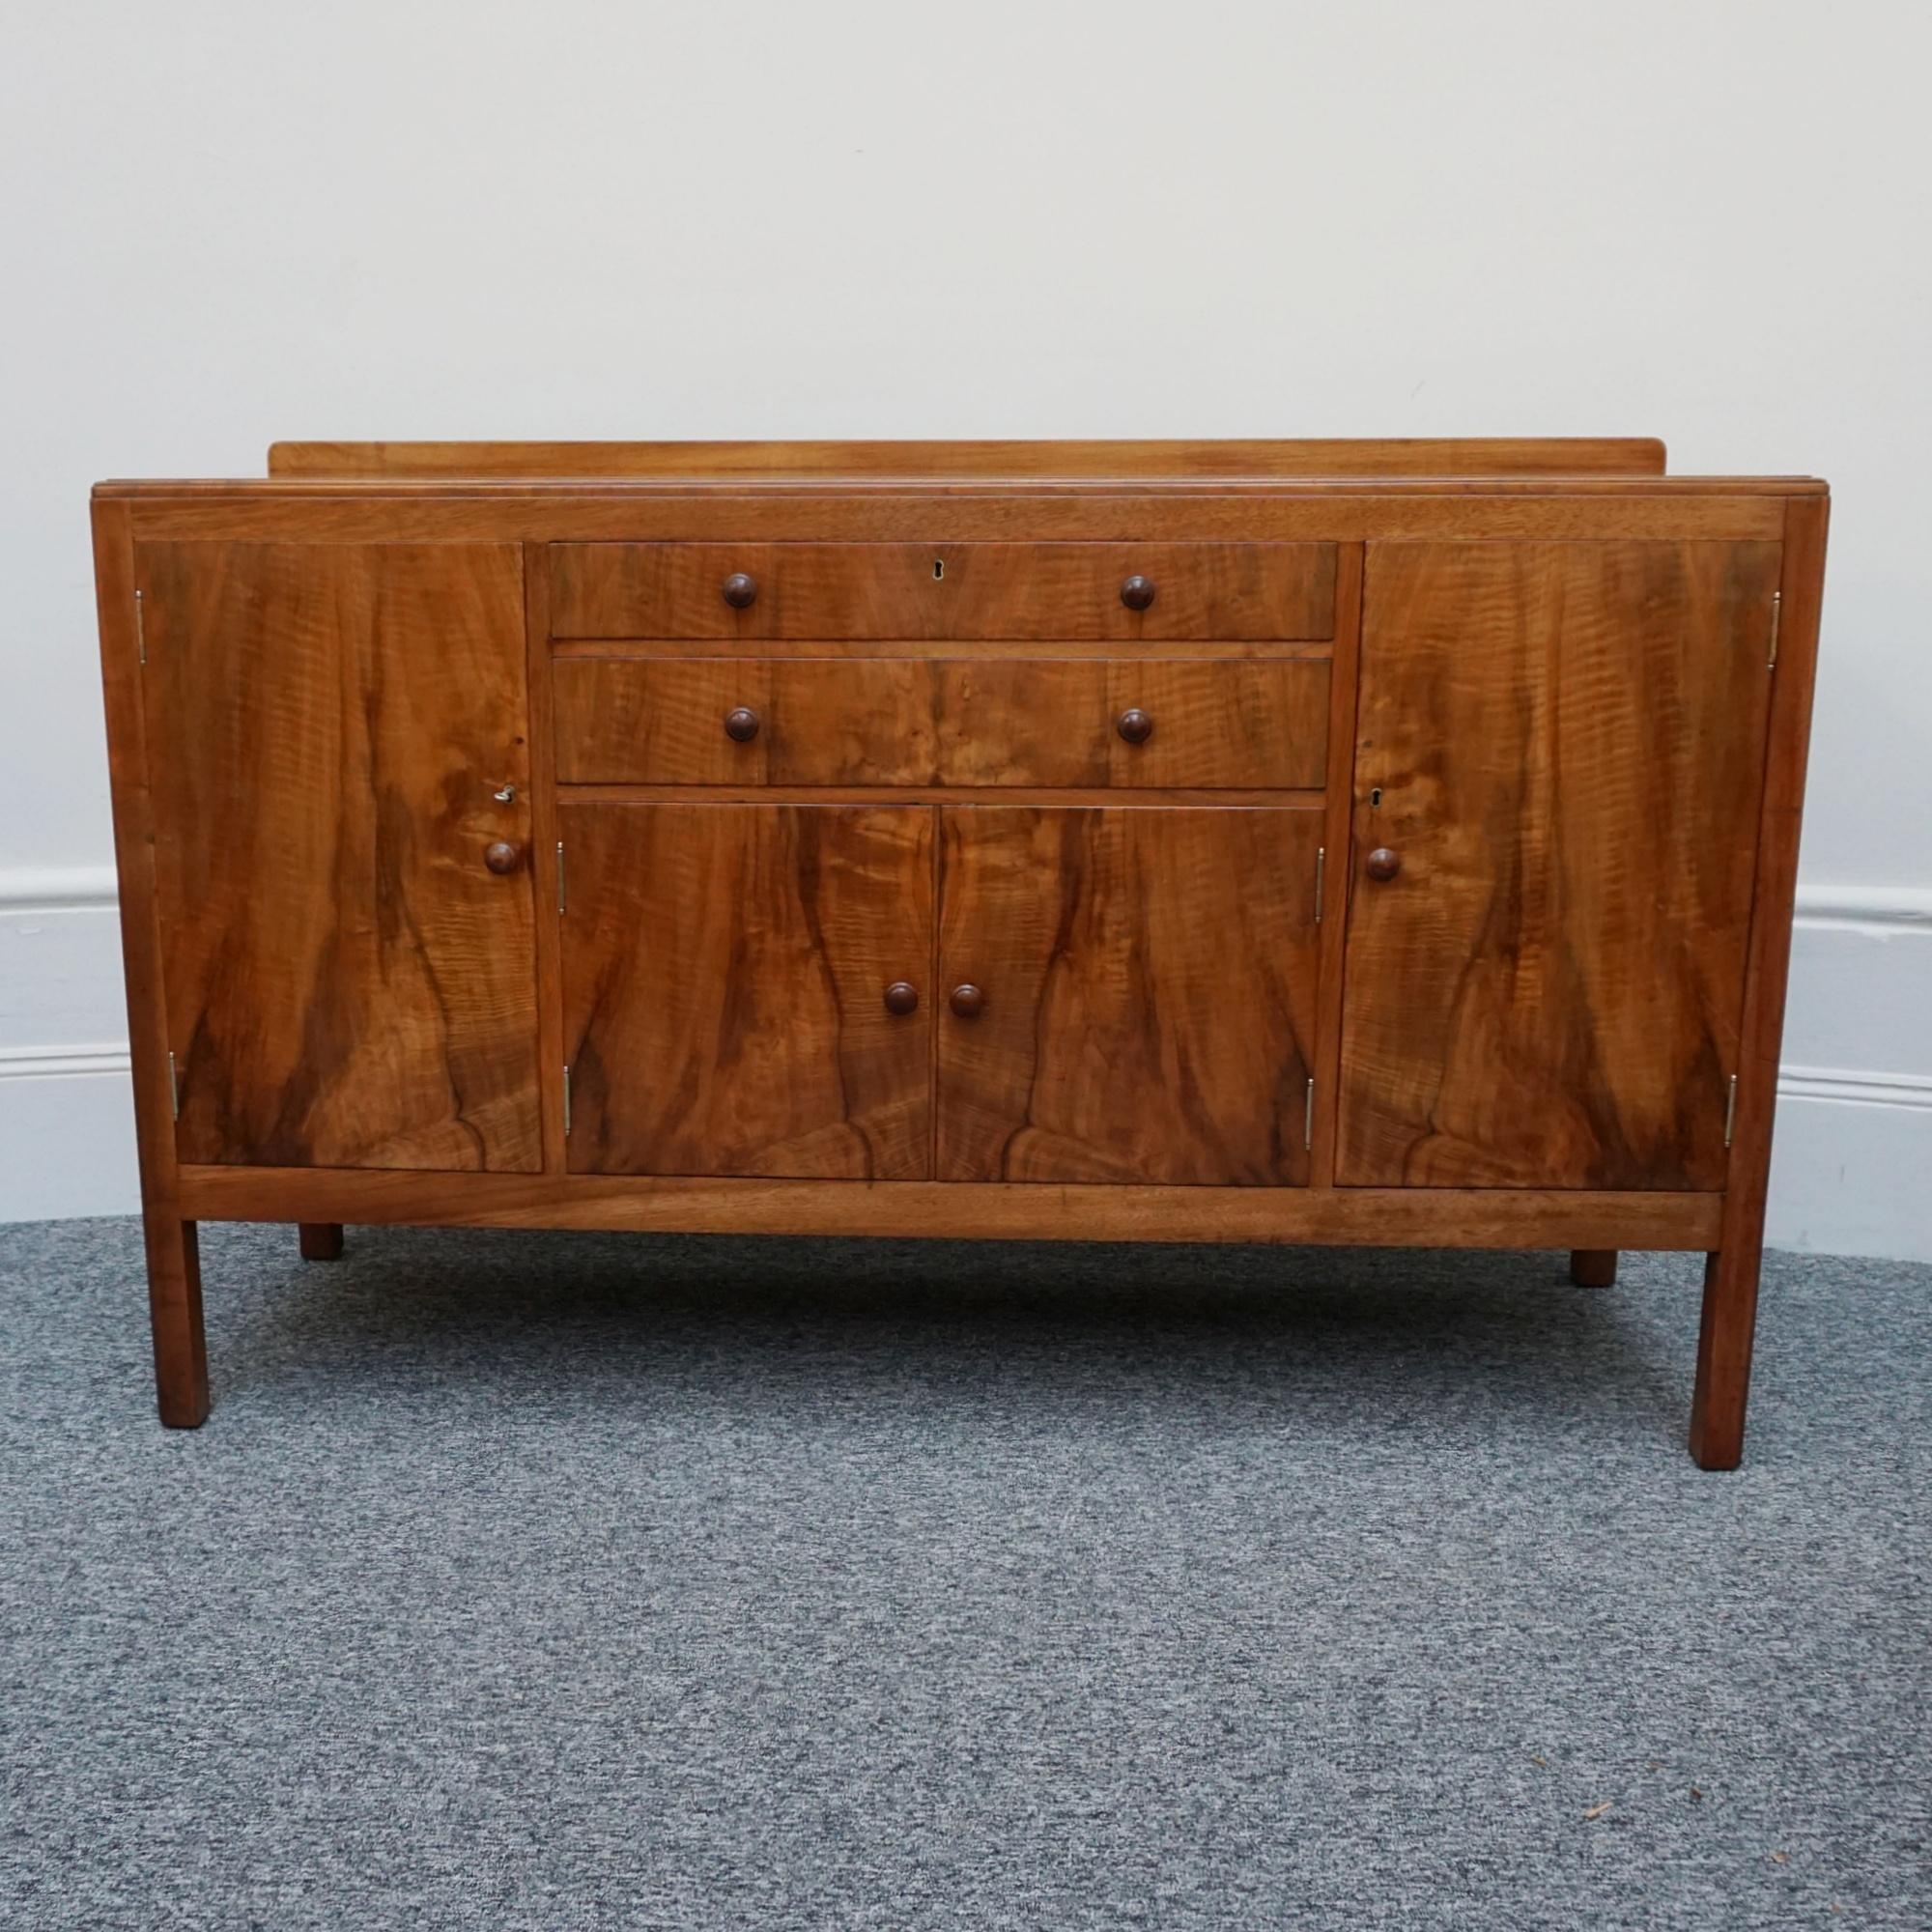 English Vintage Art Deco Sideboard by Heal's of London Burr and Figured Walnut